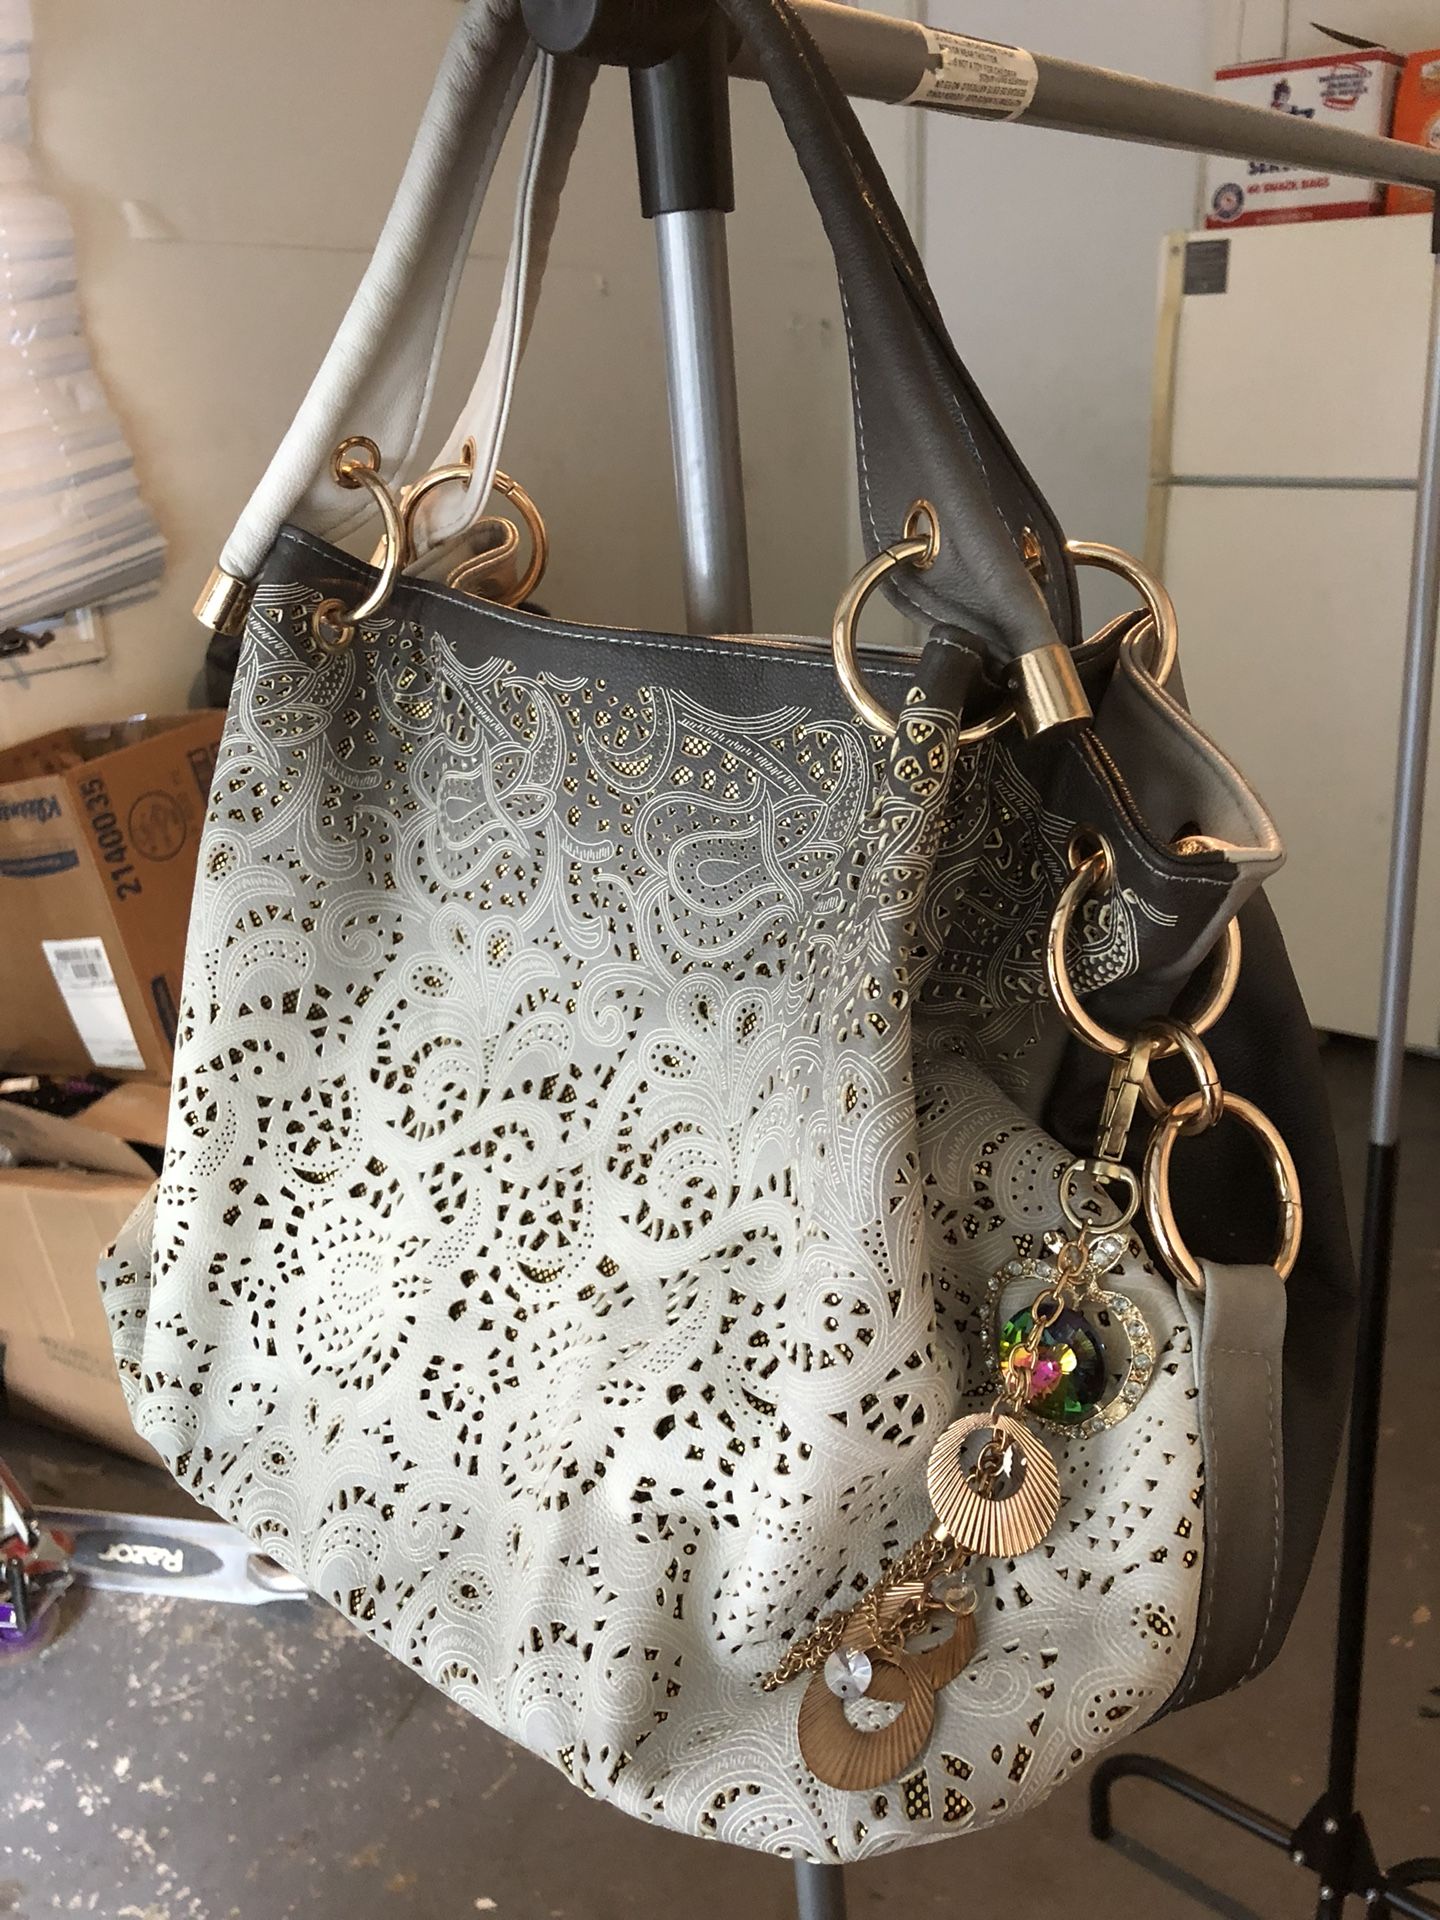 Cute purse with charm